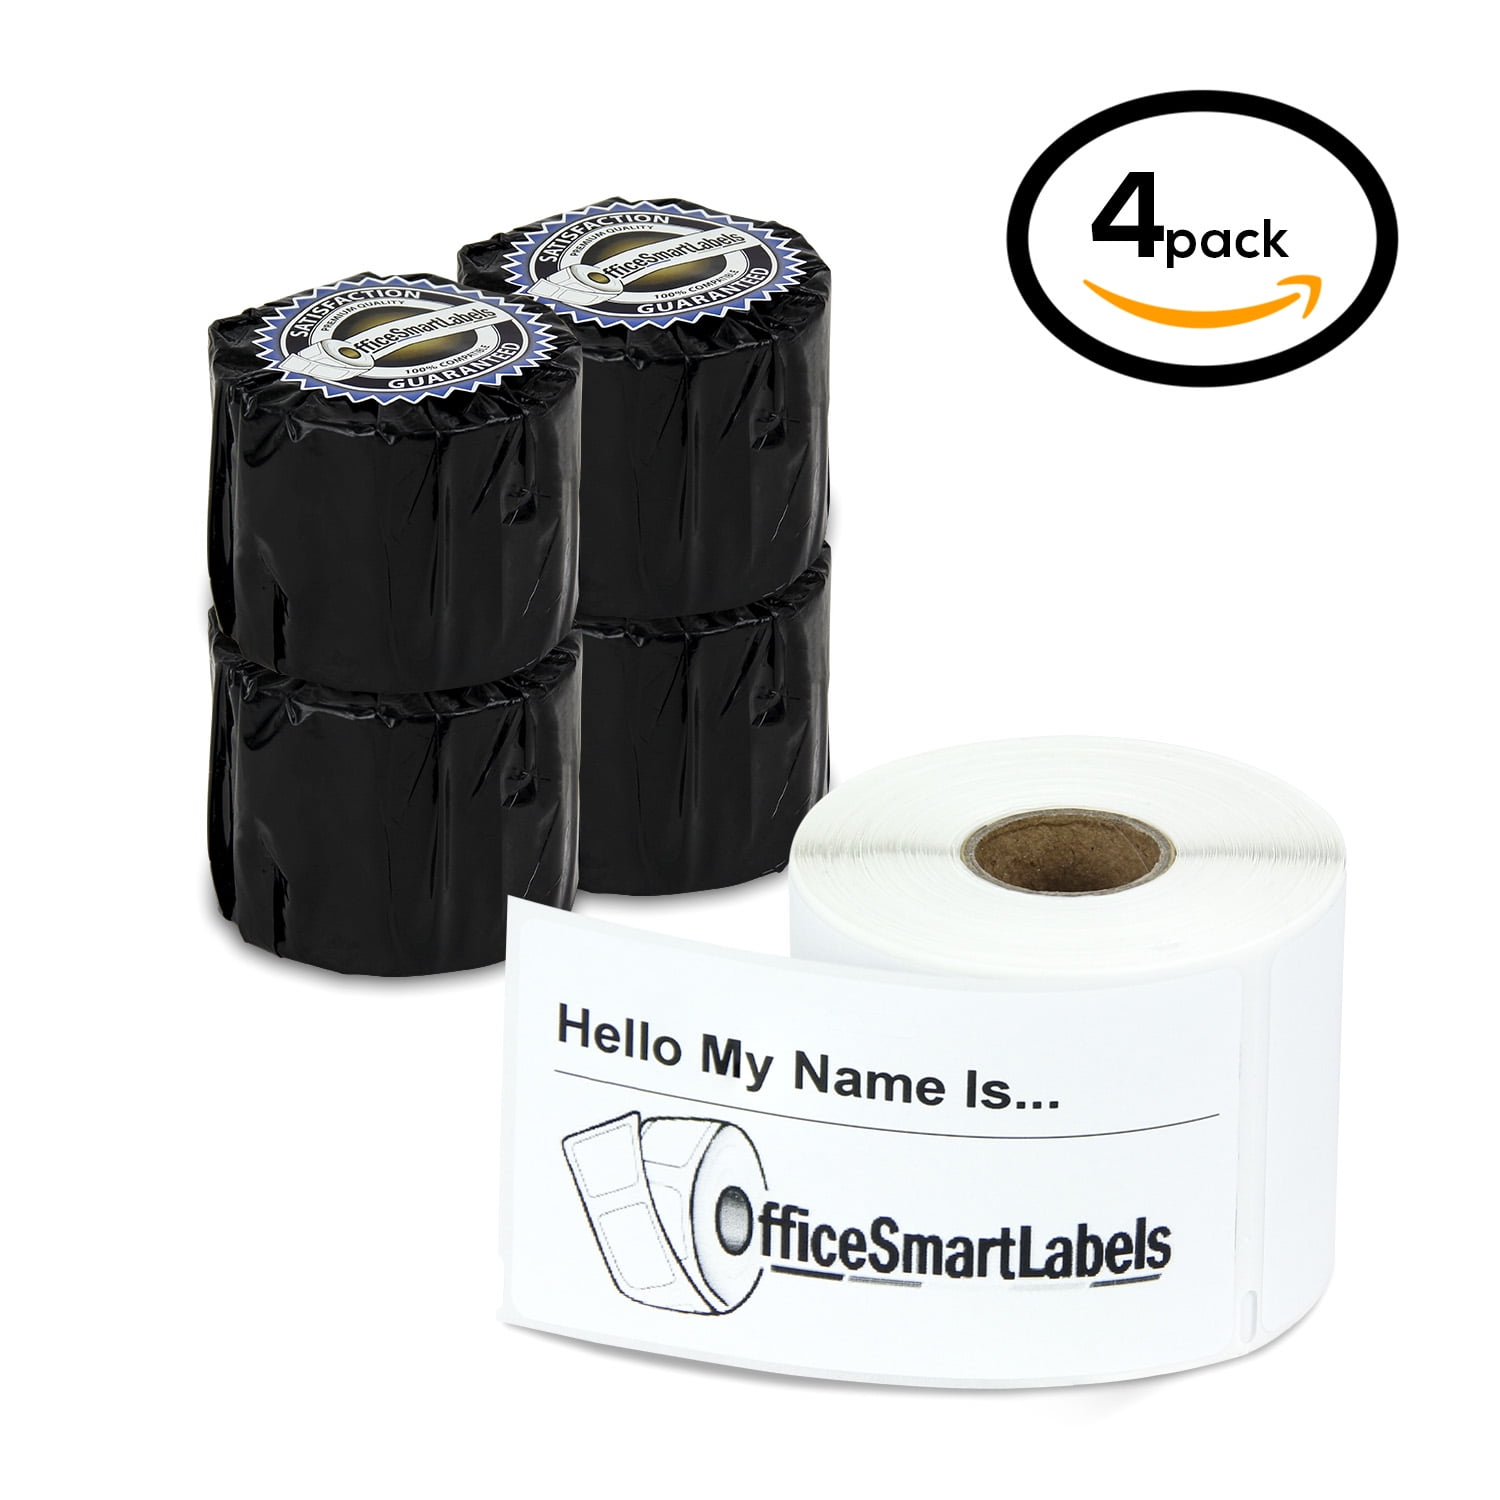 6 Rolls Dymo 30857 Compatible 2-1/4" x 4" LabelWriter Self-Adhesive White.. New 